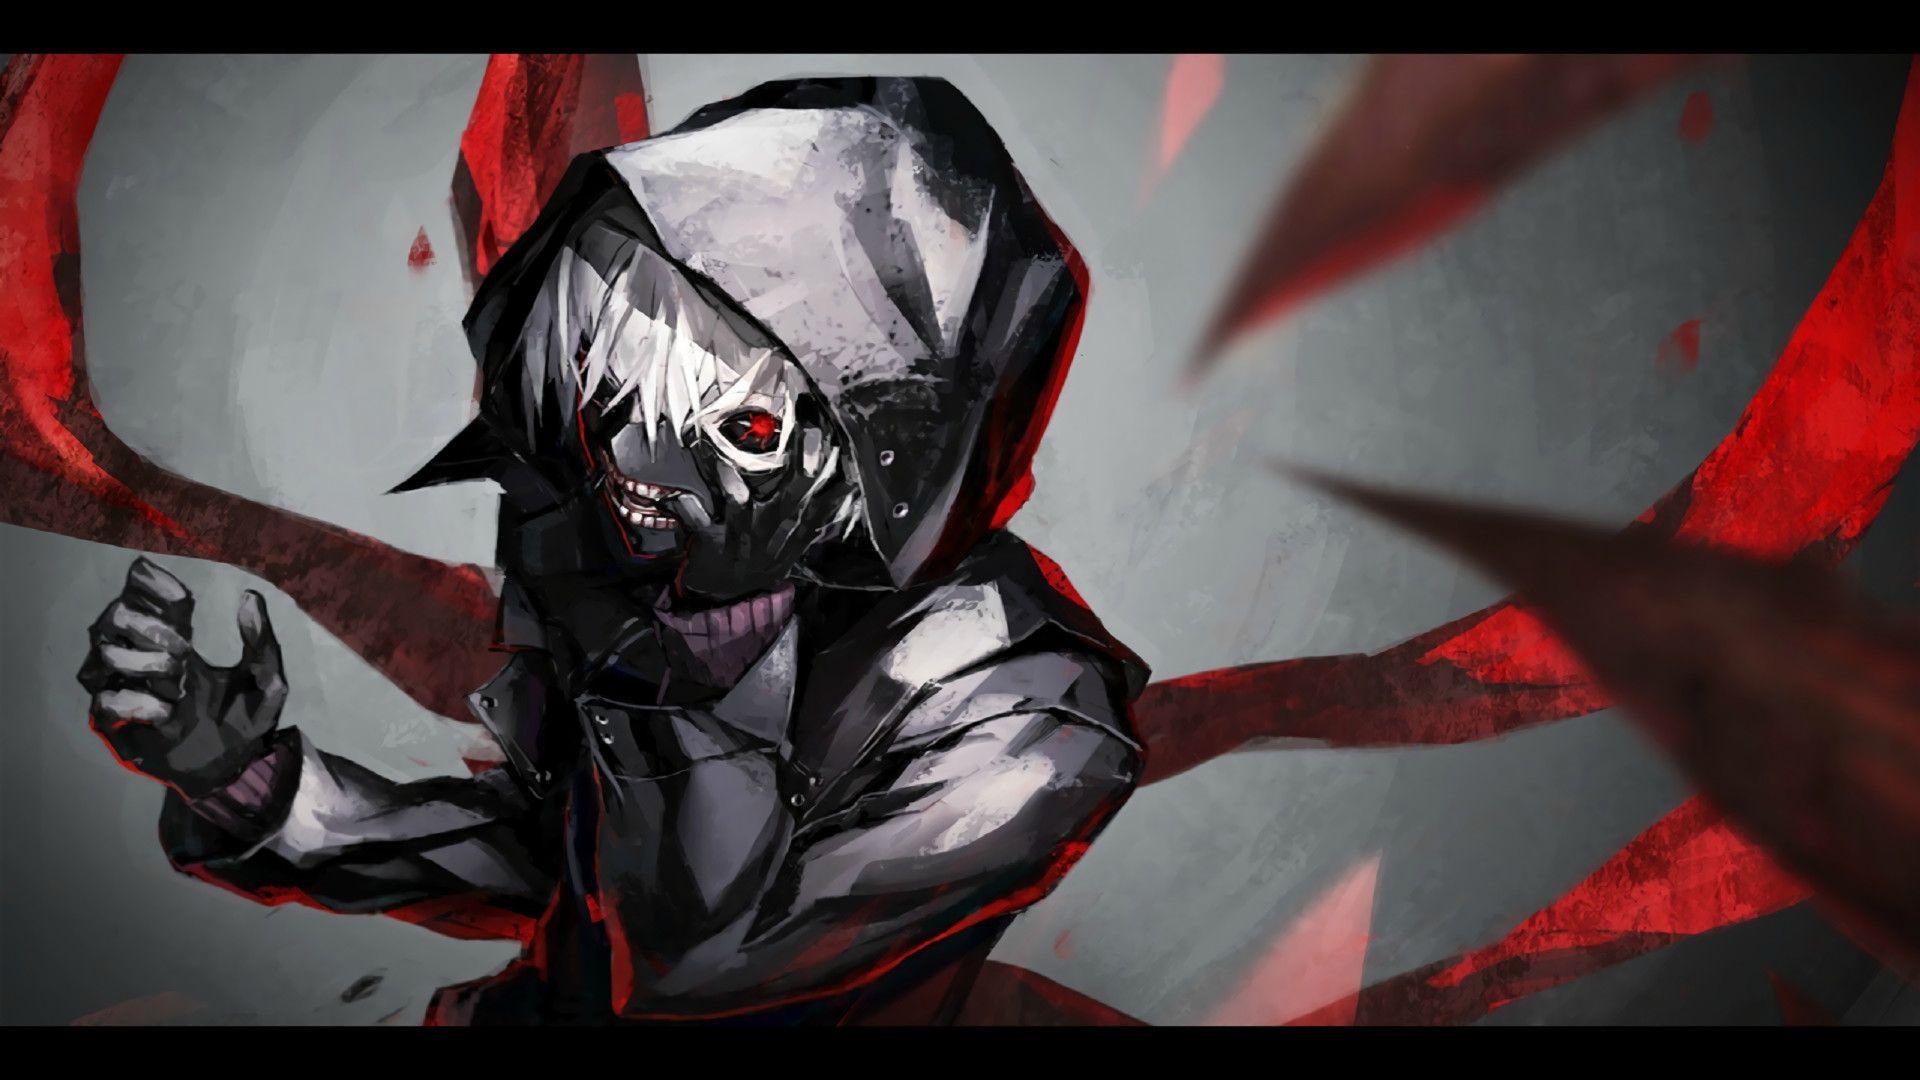 Anime Masked Badass Wallpapers - Wallpaper Cave